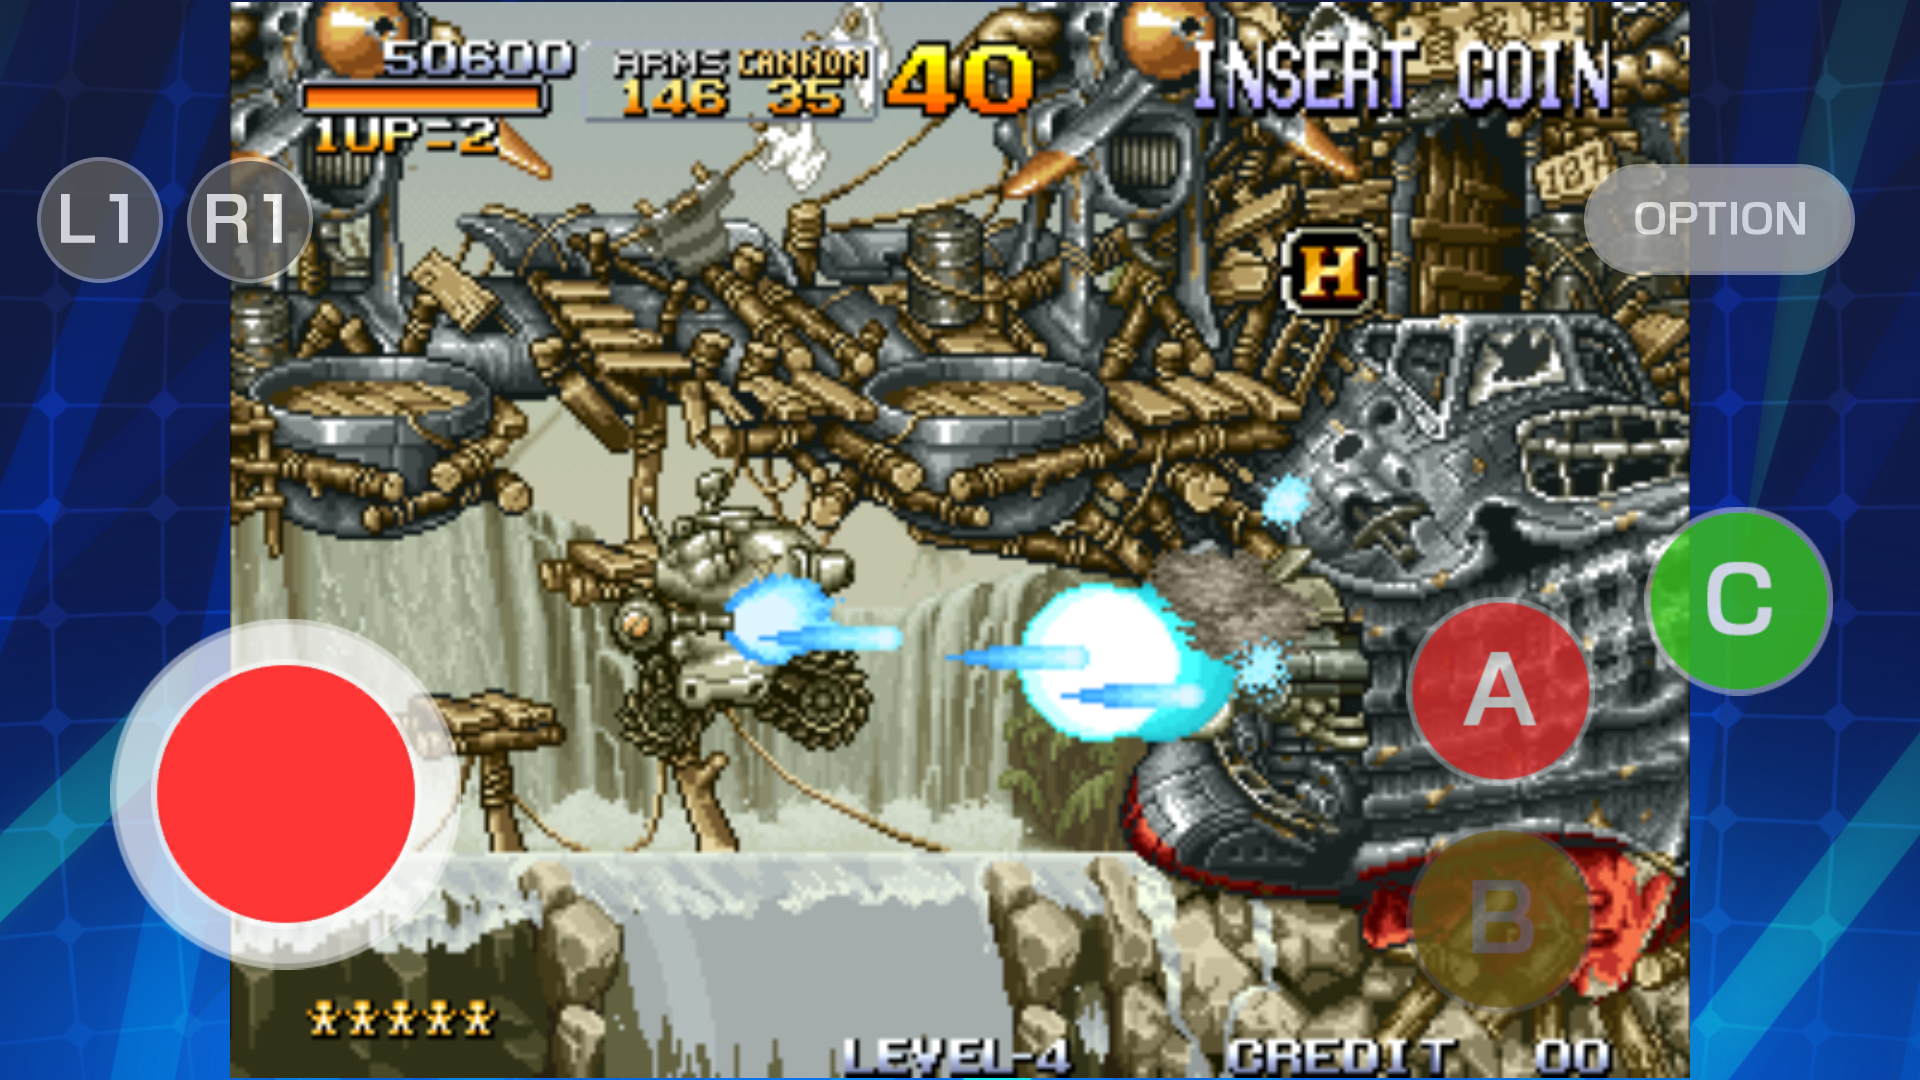 1996-Released Classic Run and Gun Game ‘Metal Slug’ ACA NeoGeo From SNK and Hamster Is Out Now on iOS and Android